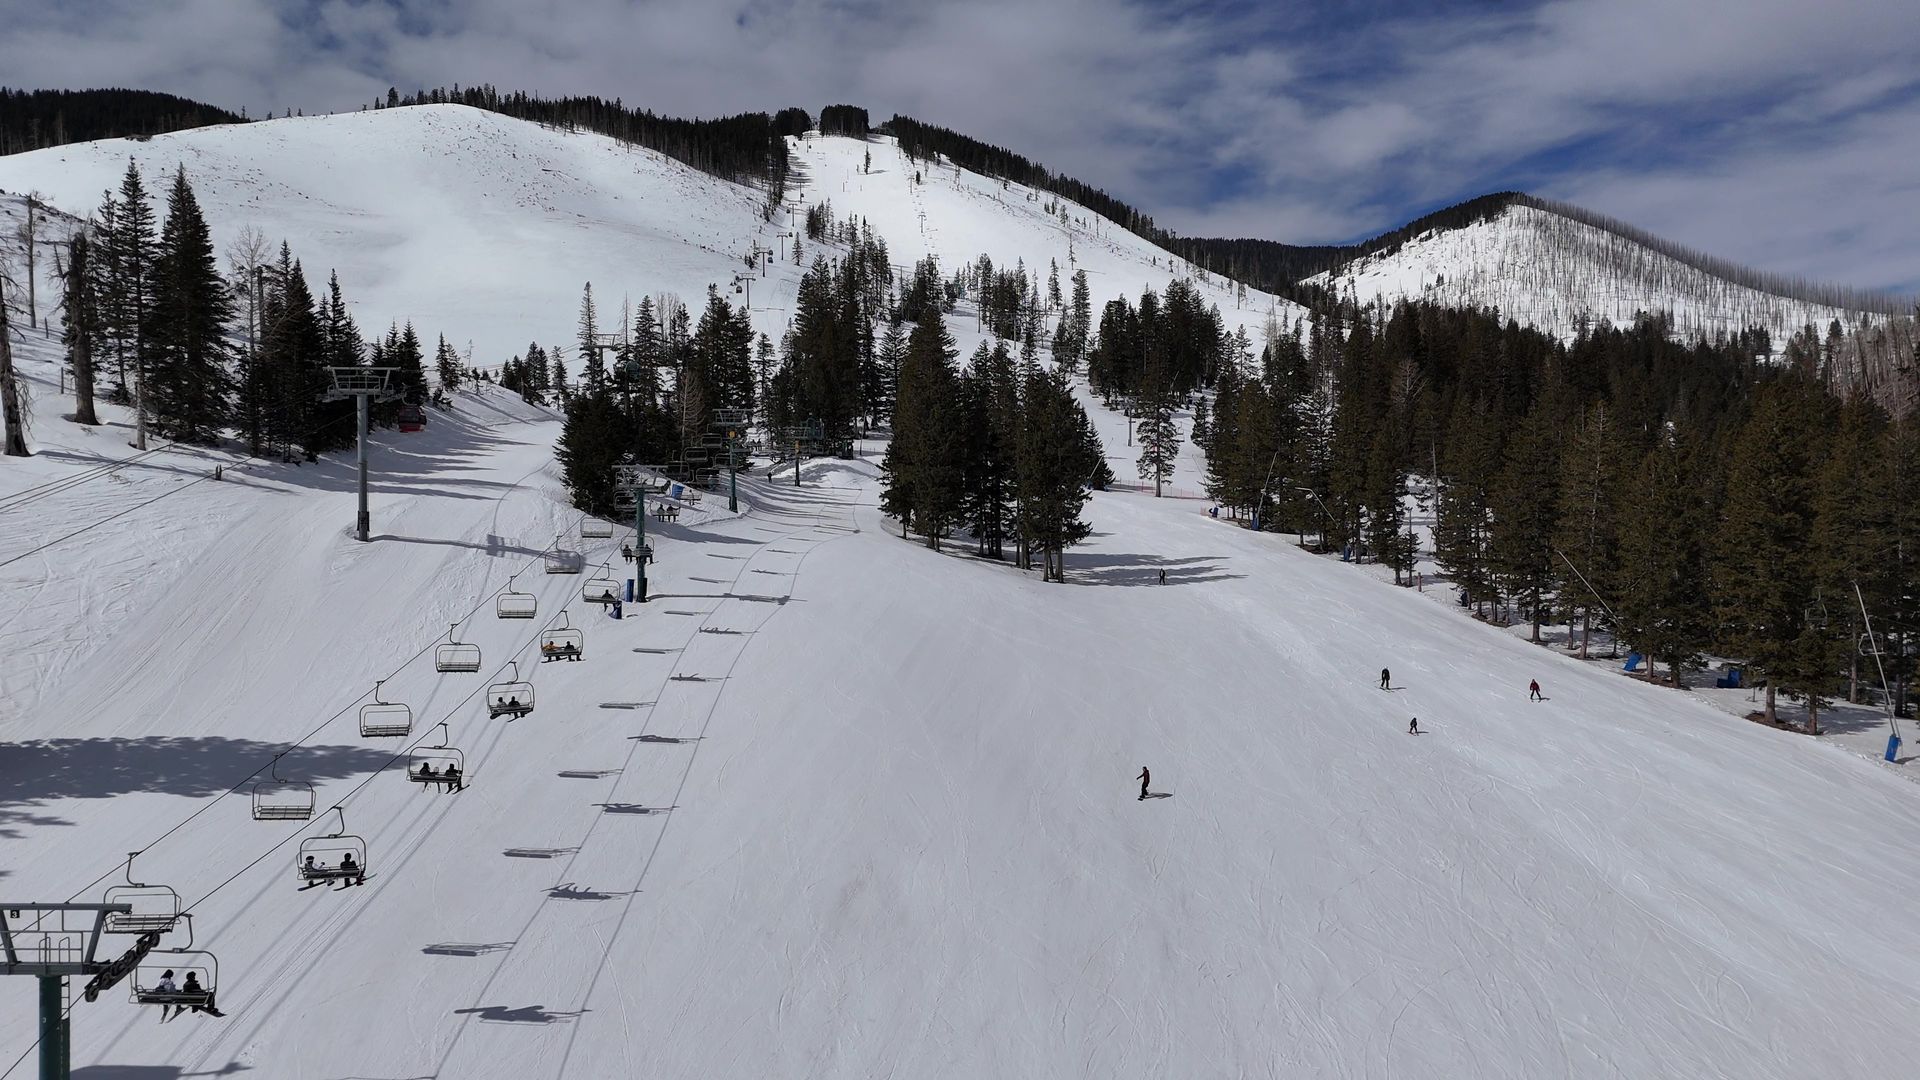 Drone shot of Ski Apache Resort in New Mexico, featuring snow-covered slopes and ski lifts against a mountain backdrop.